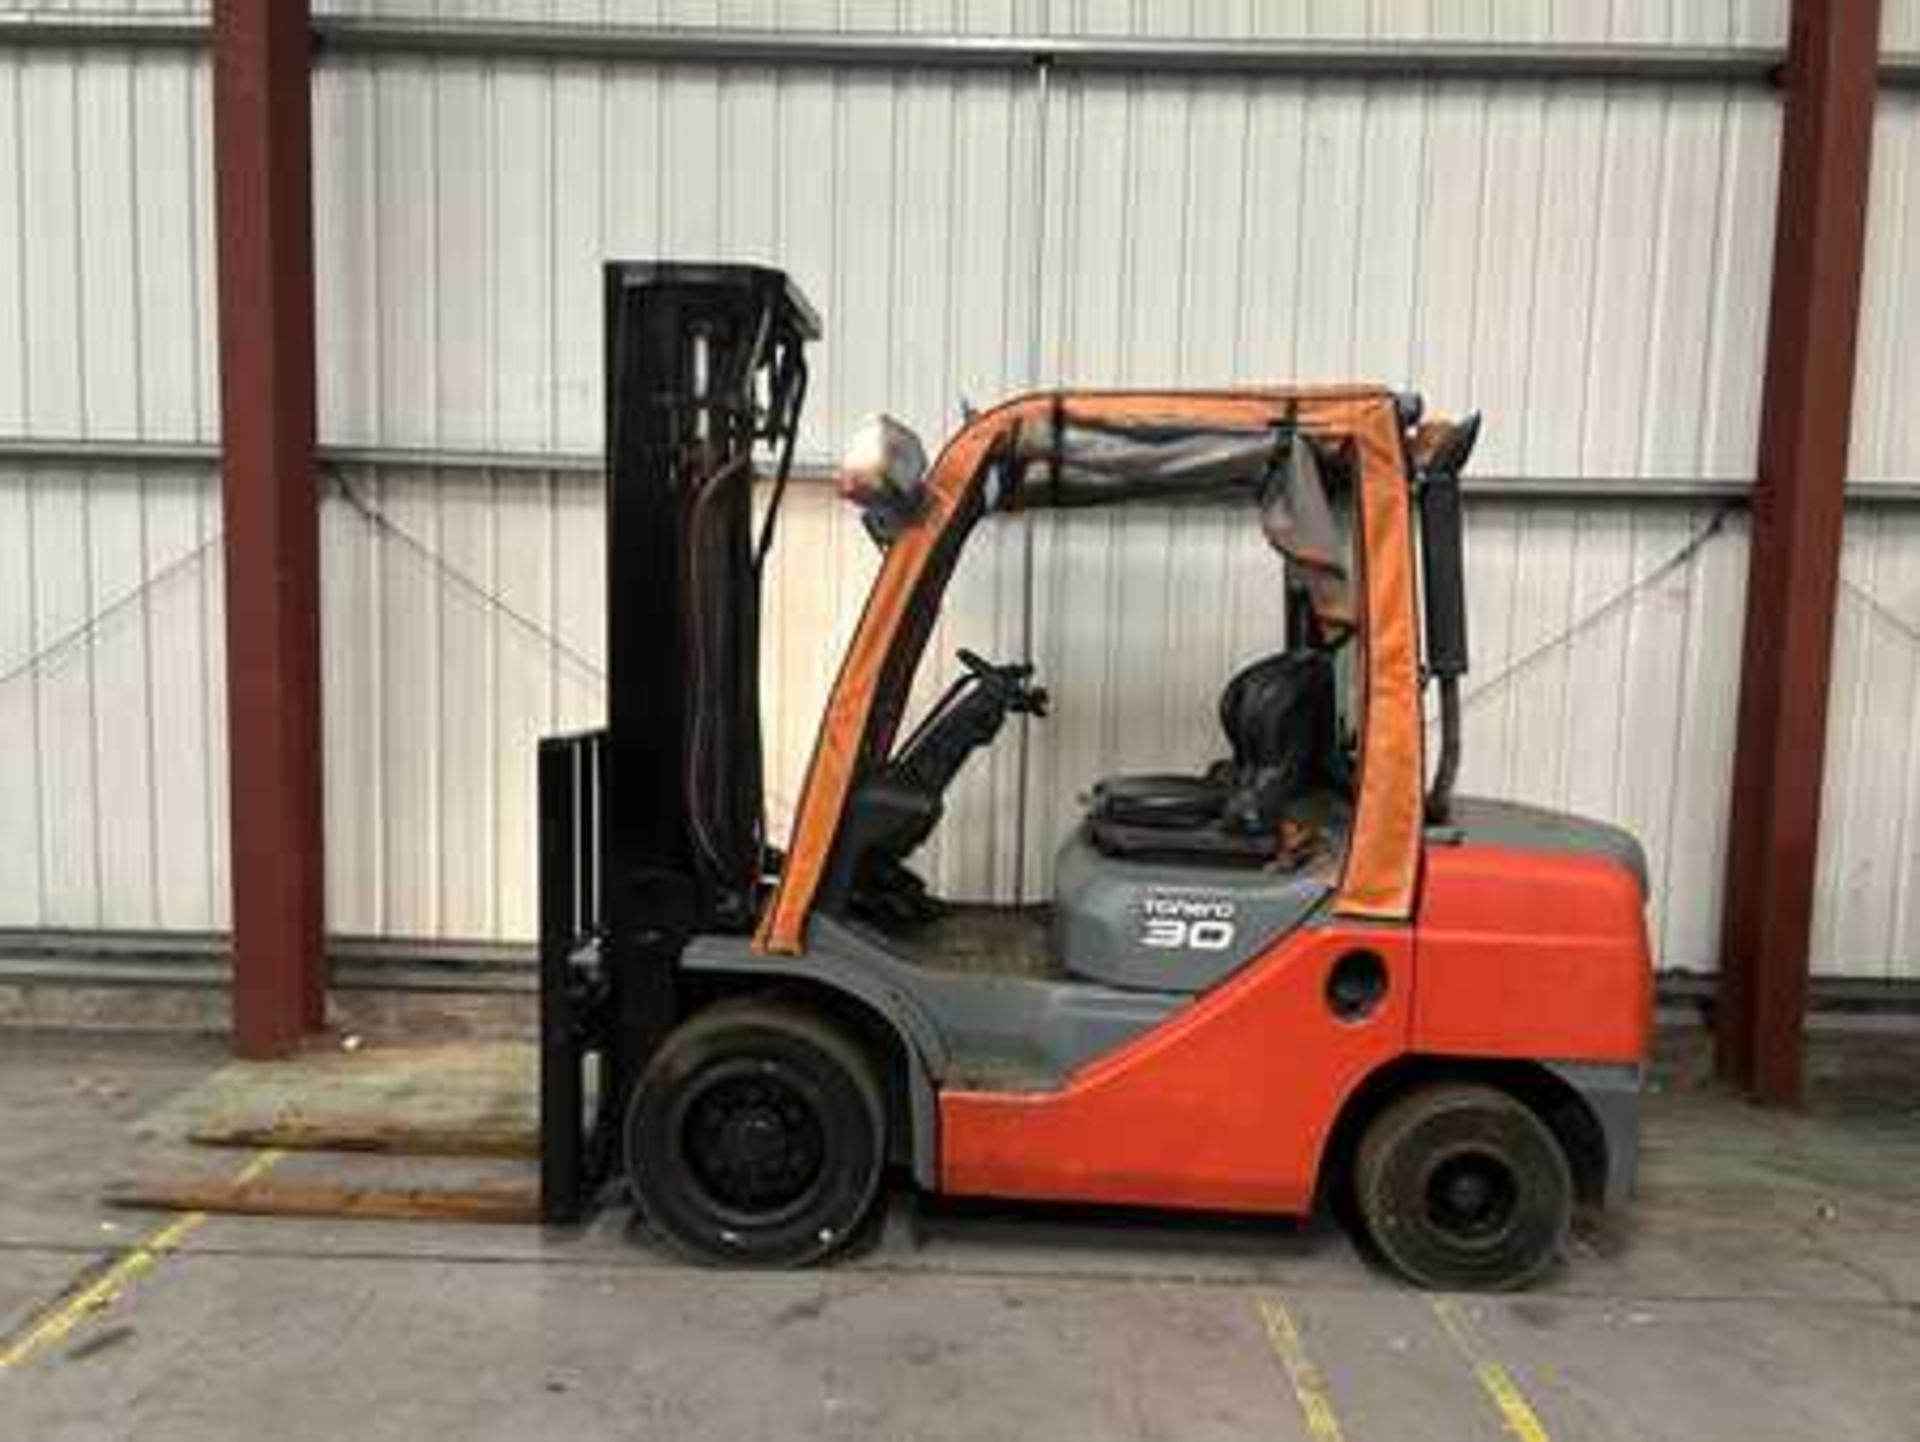 RELIABLE TOYOTA 02-8FDF30 DIESEL FORKLIFT